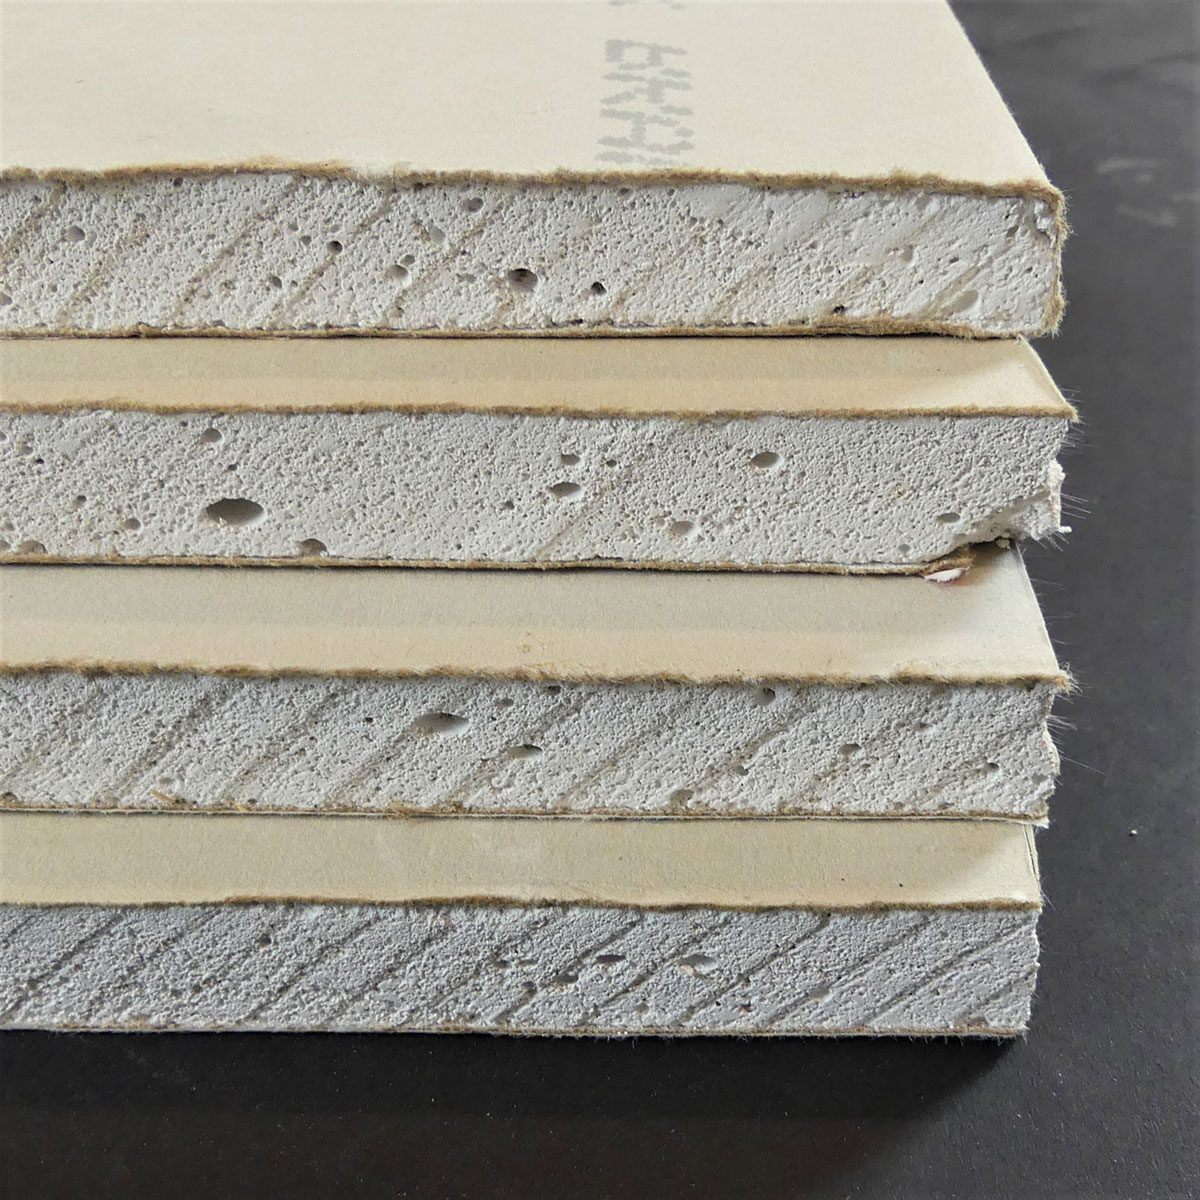 Side profile of sheets of drywall showing their thickness